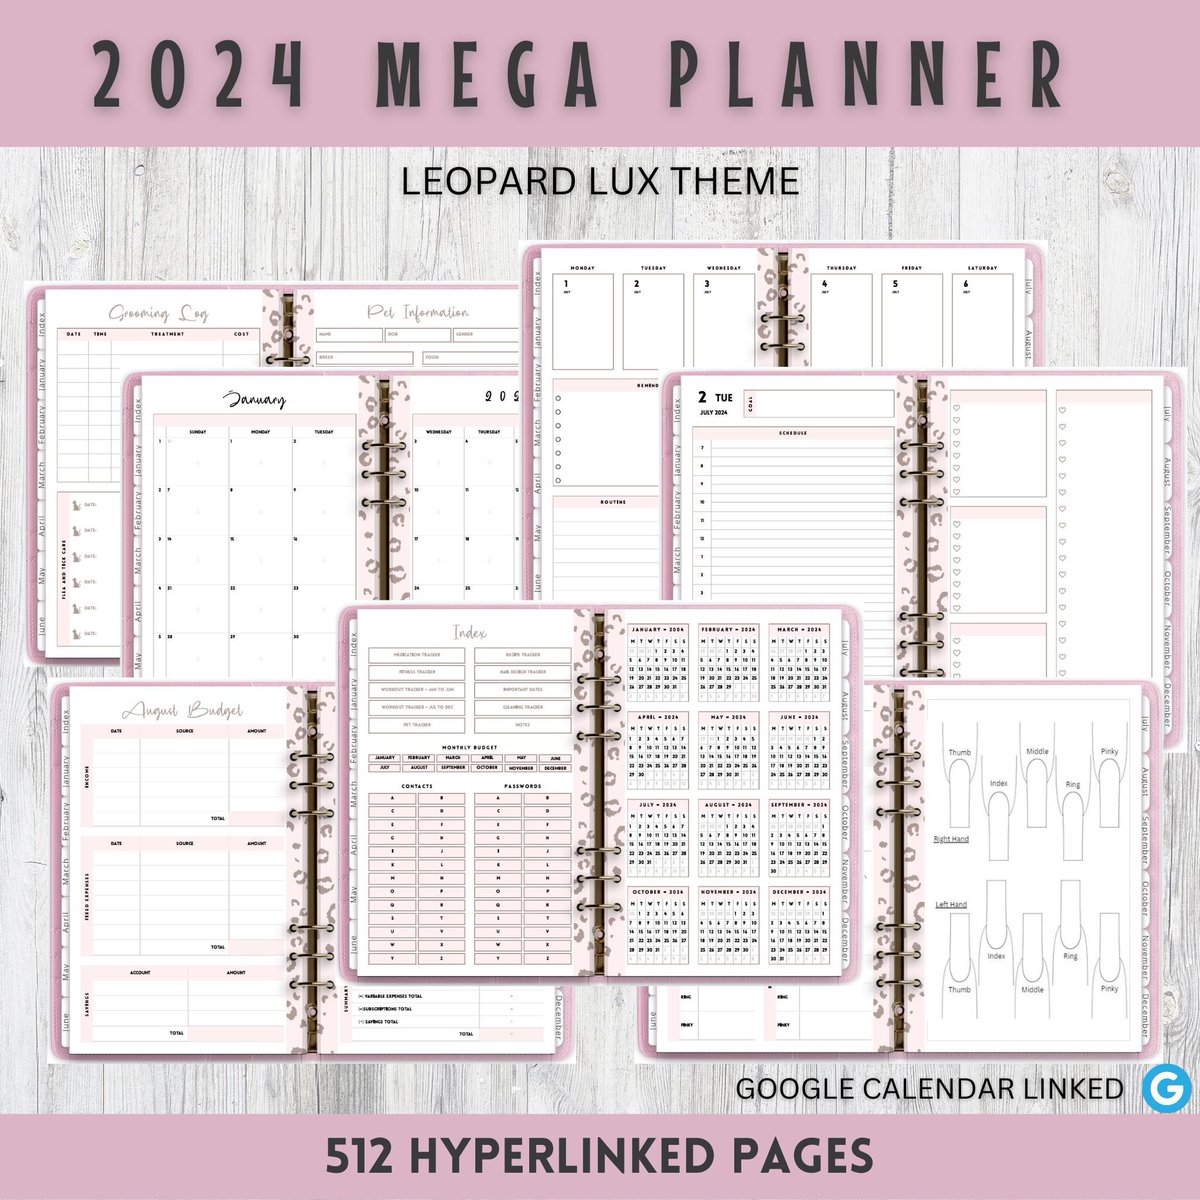 🗓️ Excited to share my 2024 Mega Planner! It’s packed with monthly, weekly, and daily layouts, making organization a breeze. Whether for work, study, or personal goals, this planner has you covered. Check it out at smmilani.com 🌟 #PlannerLove #2024Planner